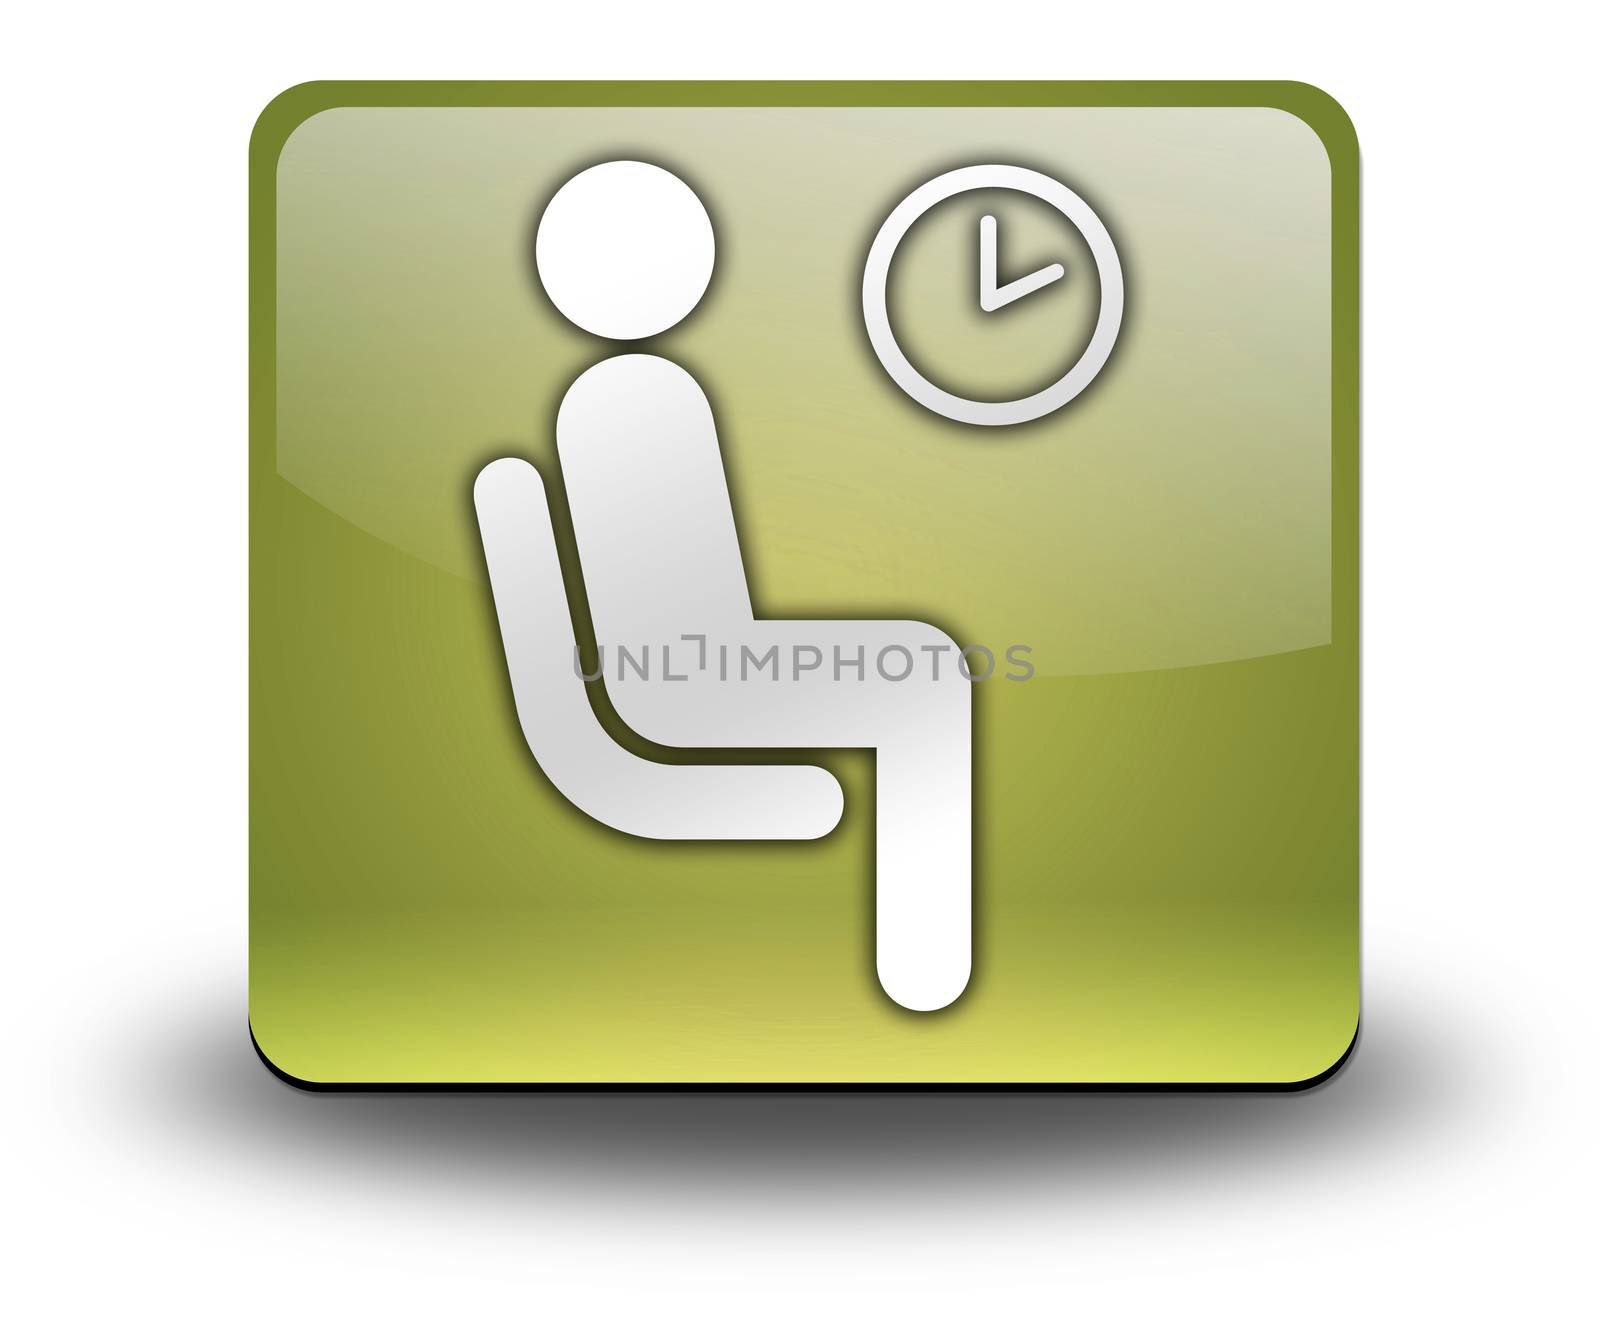 Icon, Button, Pictogram with Waiting Room symbol